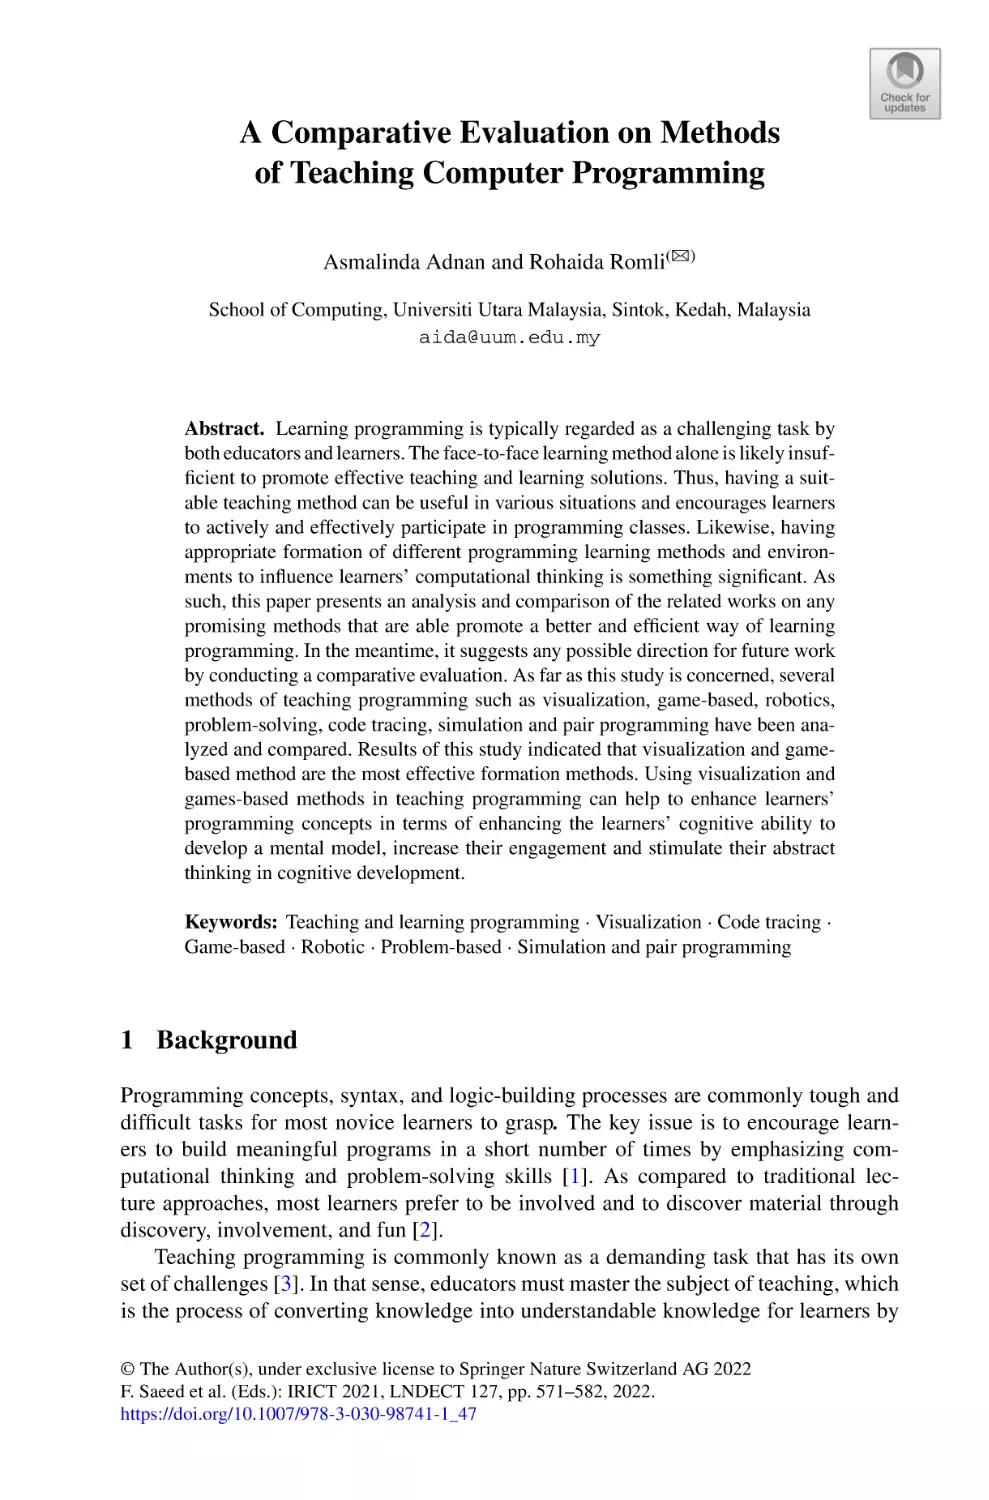 A Comparative Evaluation on Methods of Teaching Computer Programming
1 Background